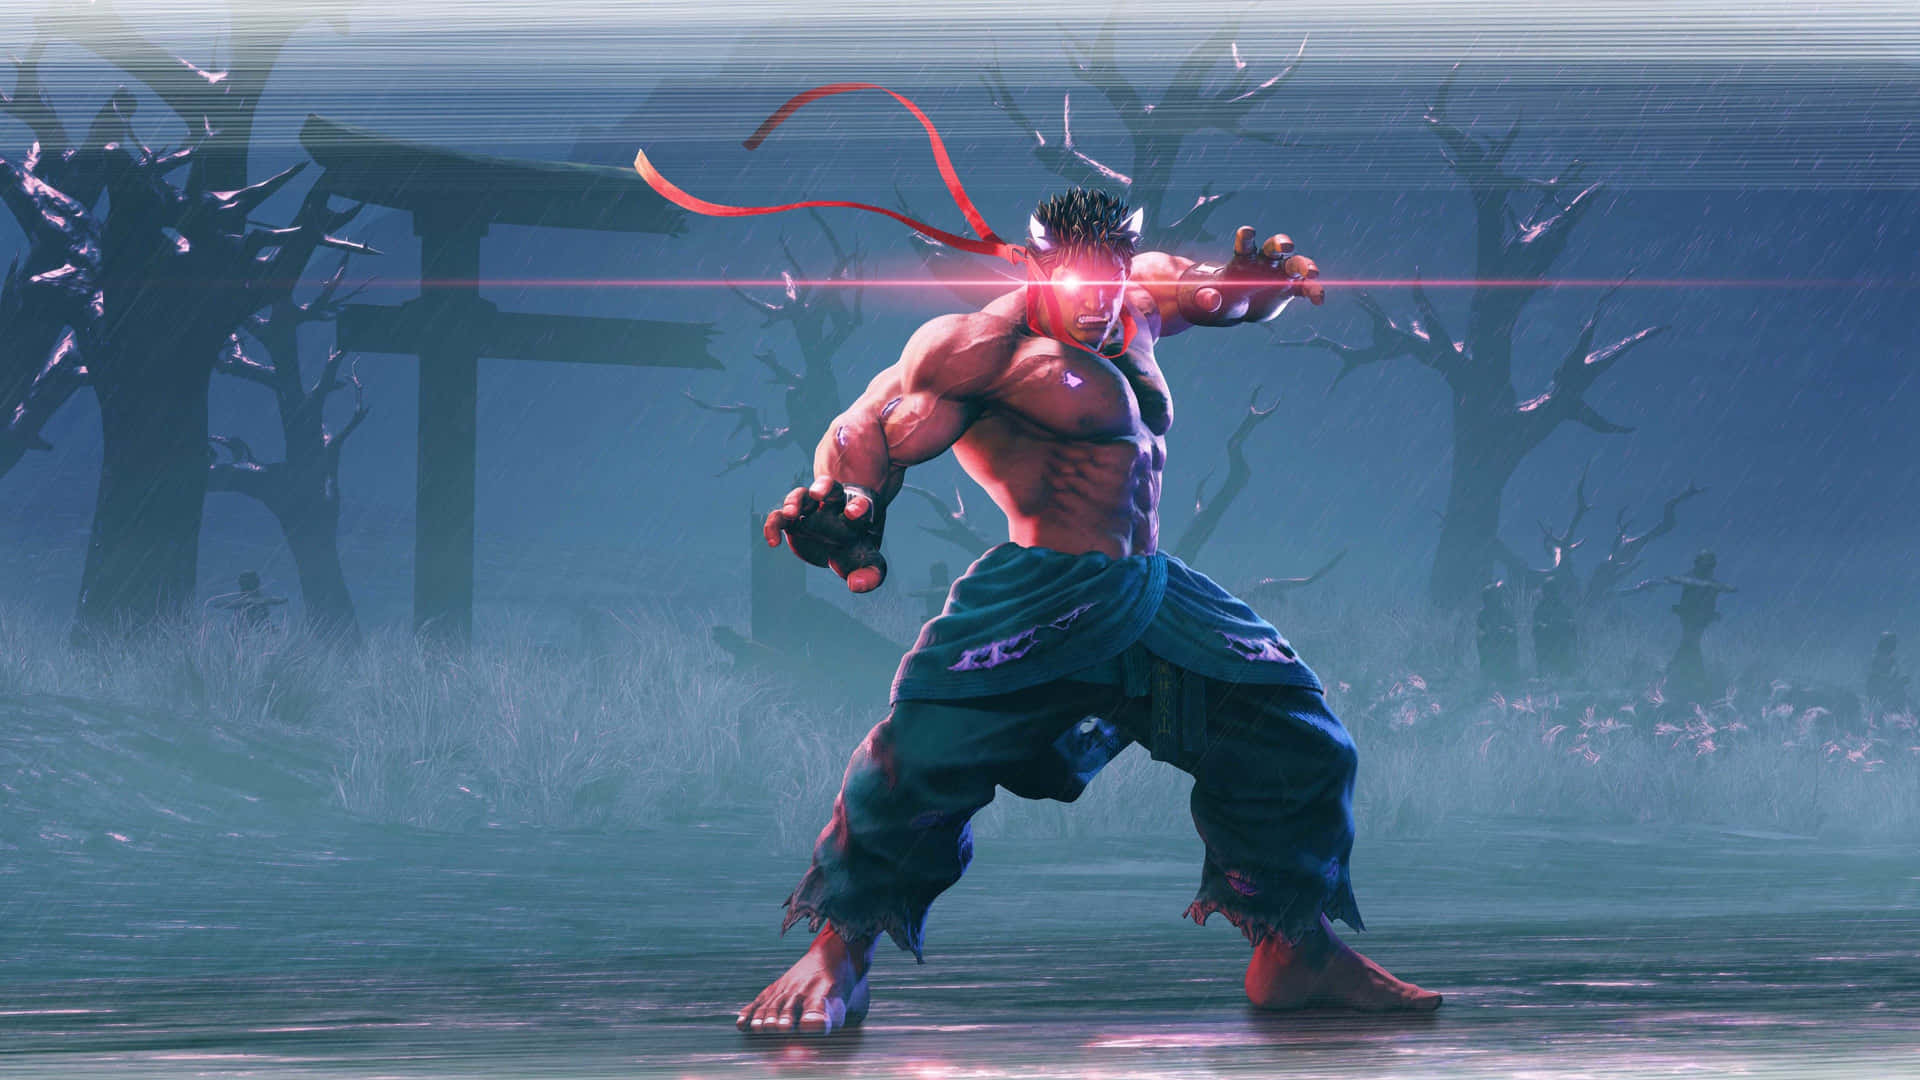 Captivating Street Fighter Characters in Action Wallpaper